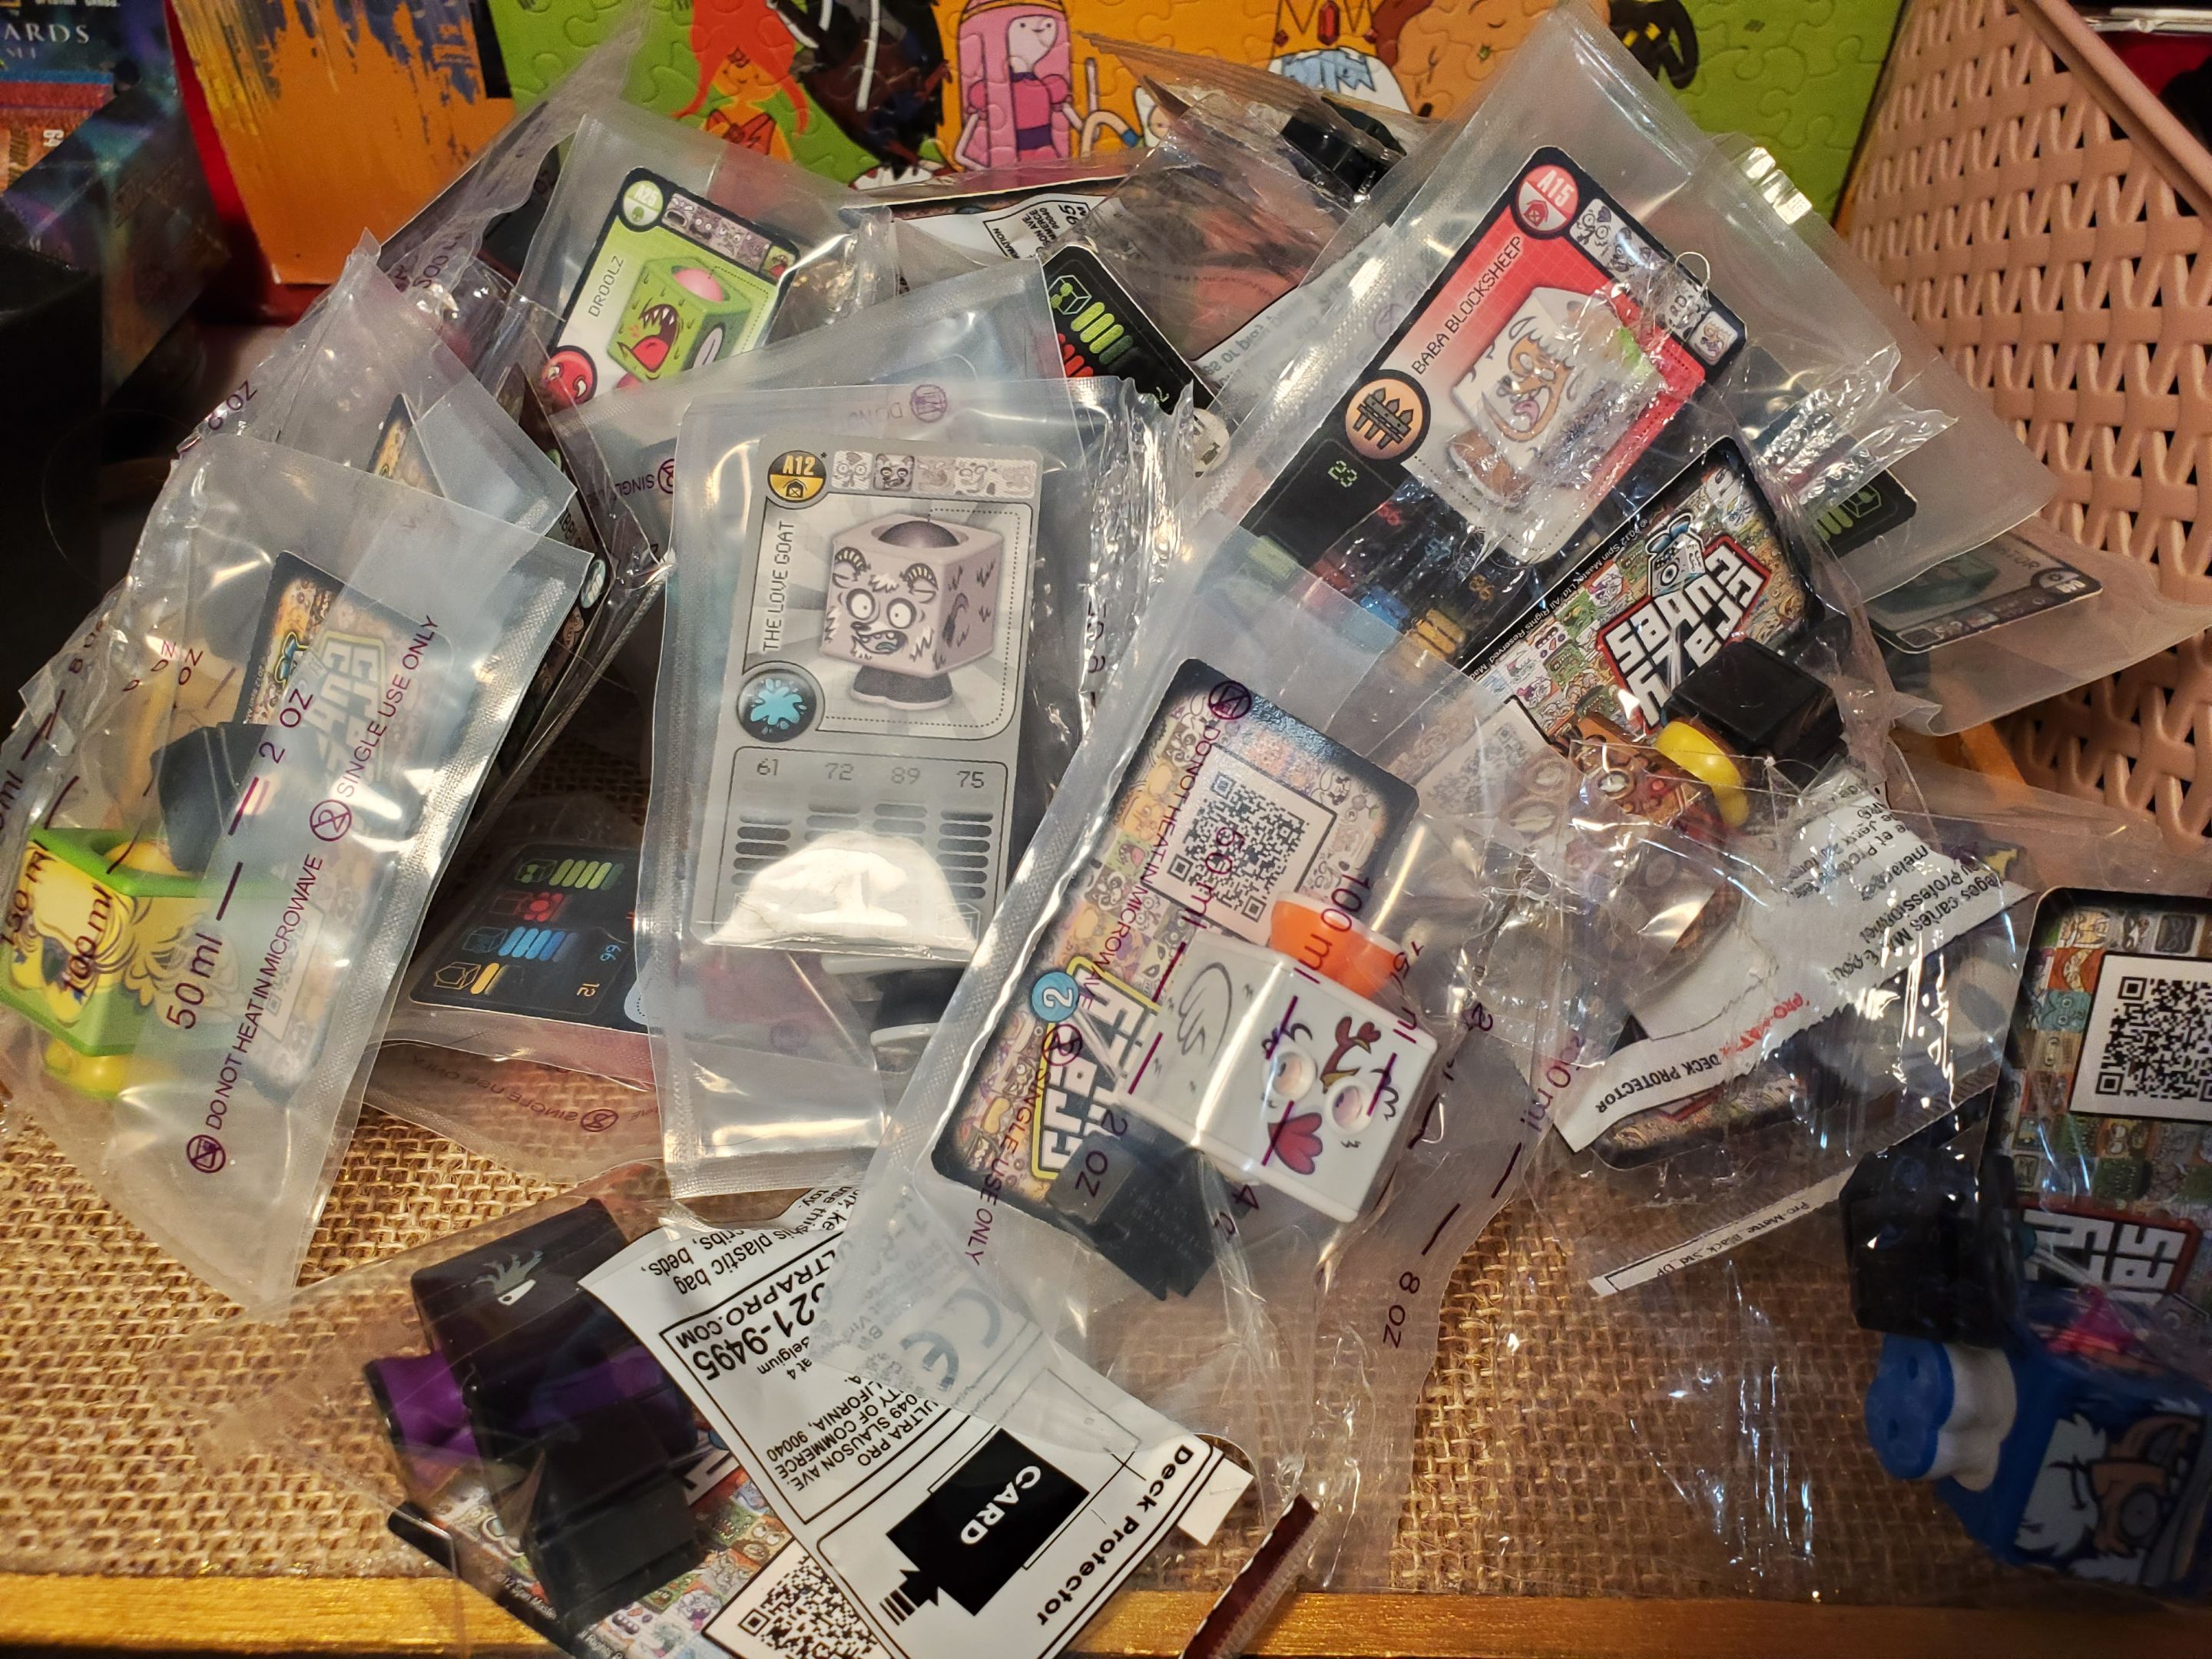 @cabalcoffers/crazy-cubes-pick-one-toy-used-con-with-card-and-ball-spin-master-collectibles